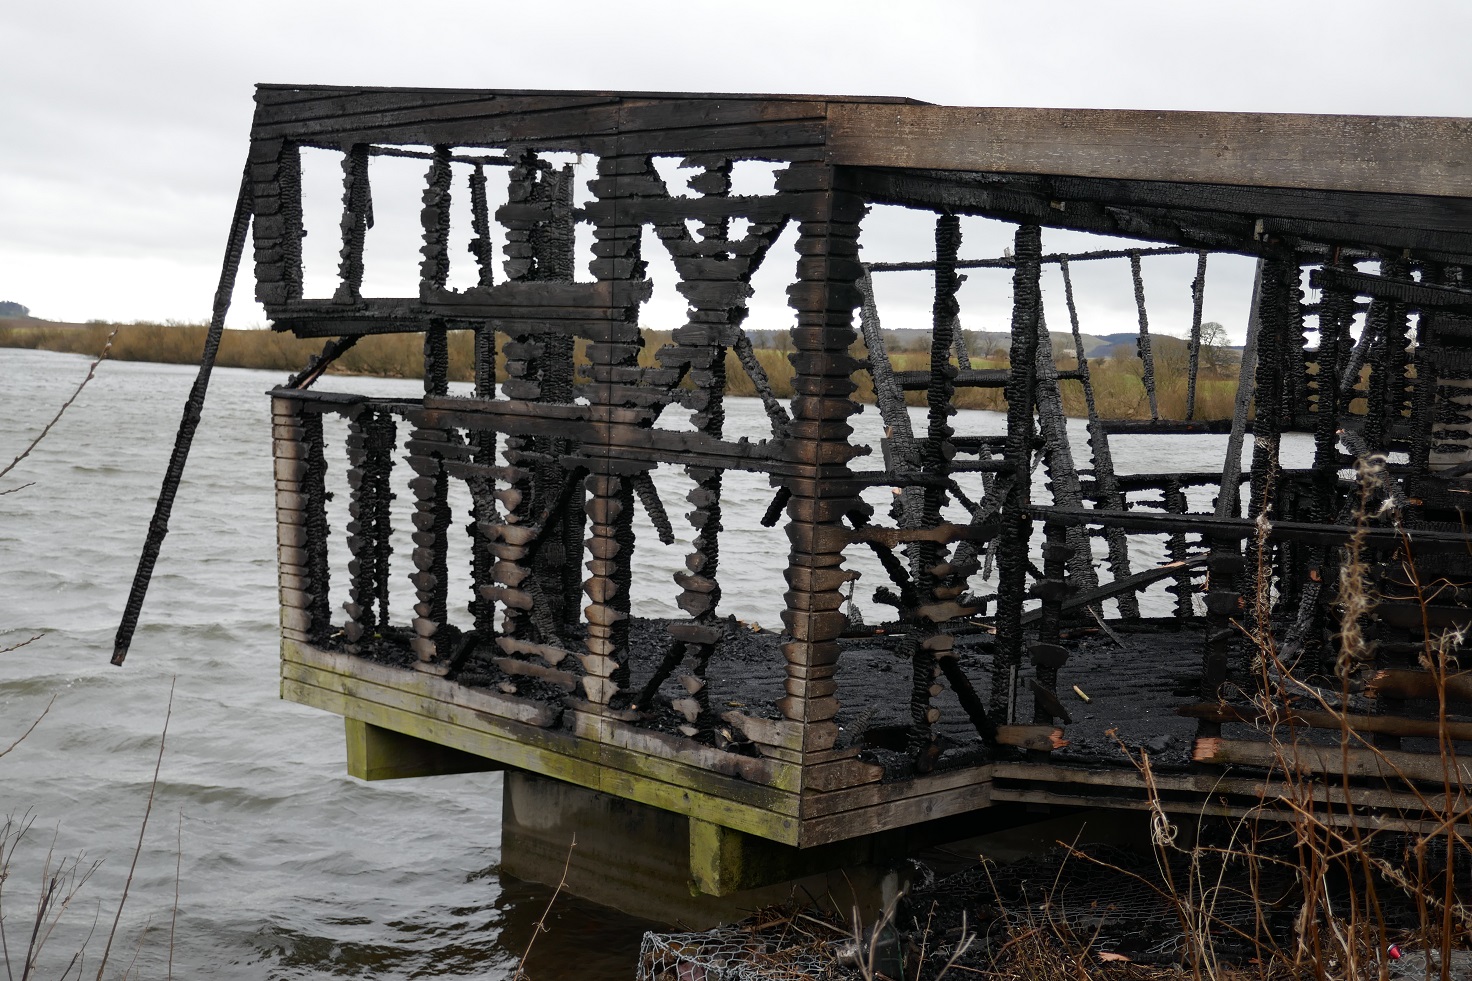 In Pictures: New Phoenix Hide rises from ashes at Loch Leven nature reserve